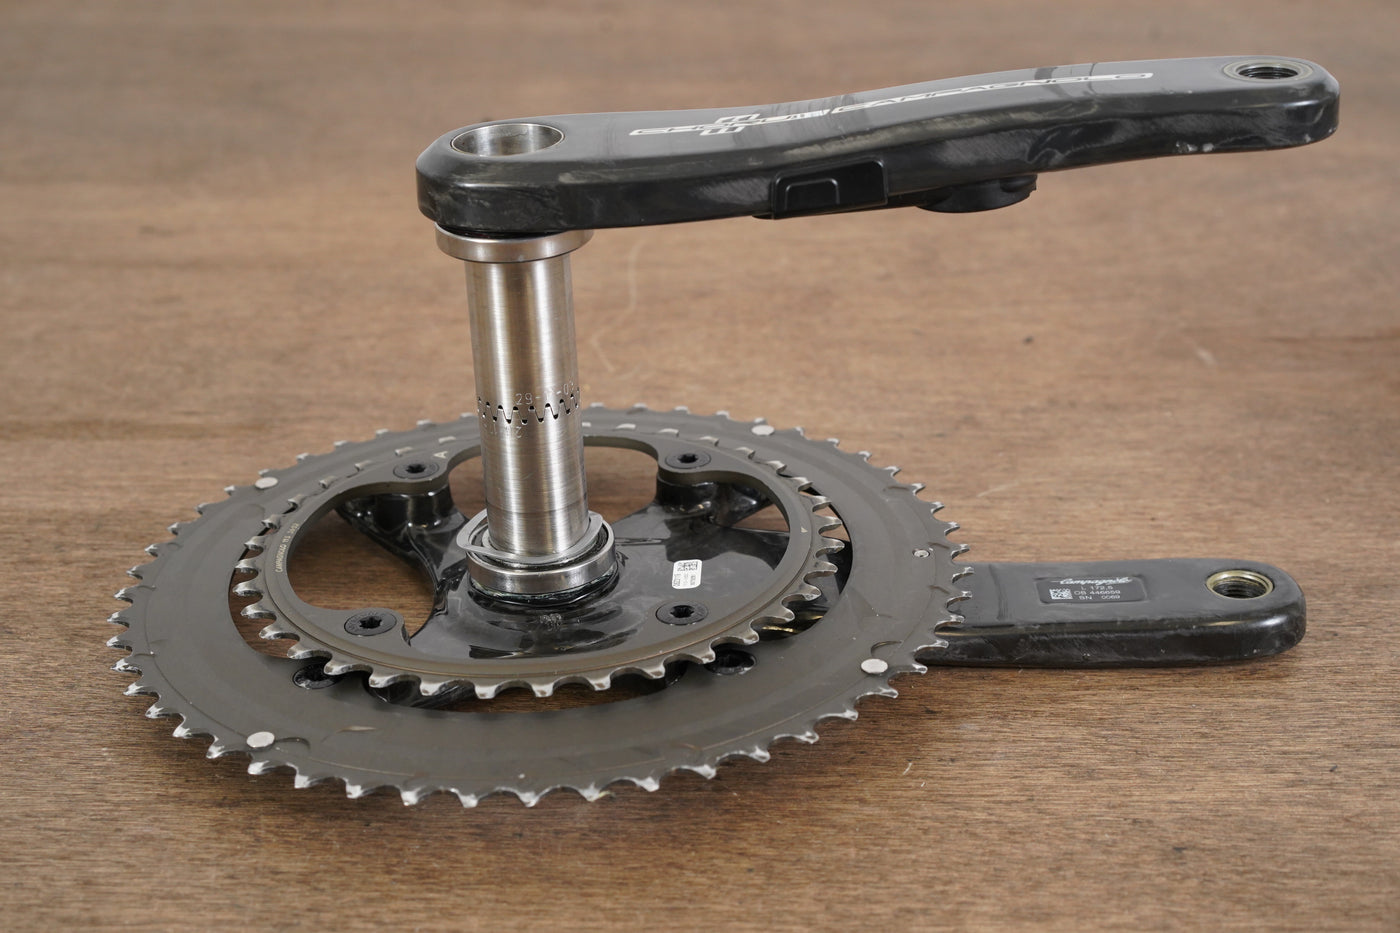 172.5mm 52/36T Campagnolo Chorus 11 Speed Carbon Stages Power Meter Crankset